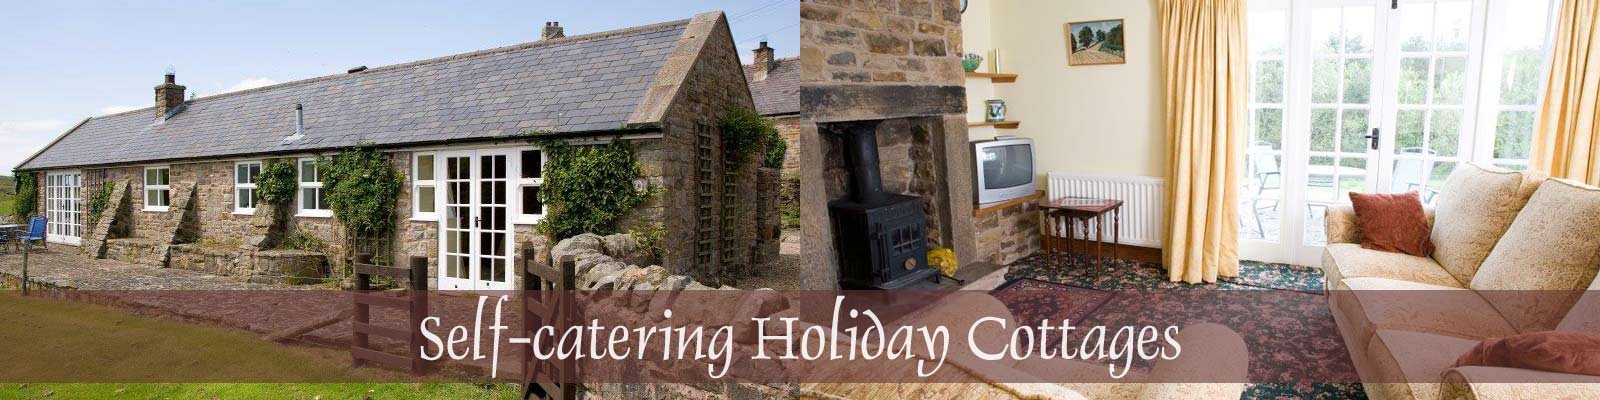 Self-catering Holidays